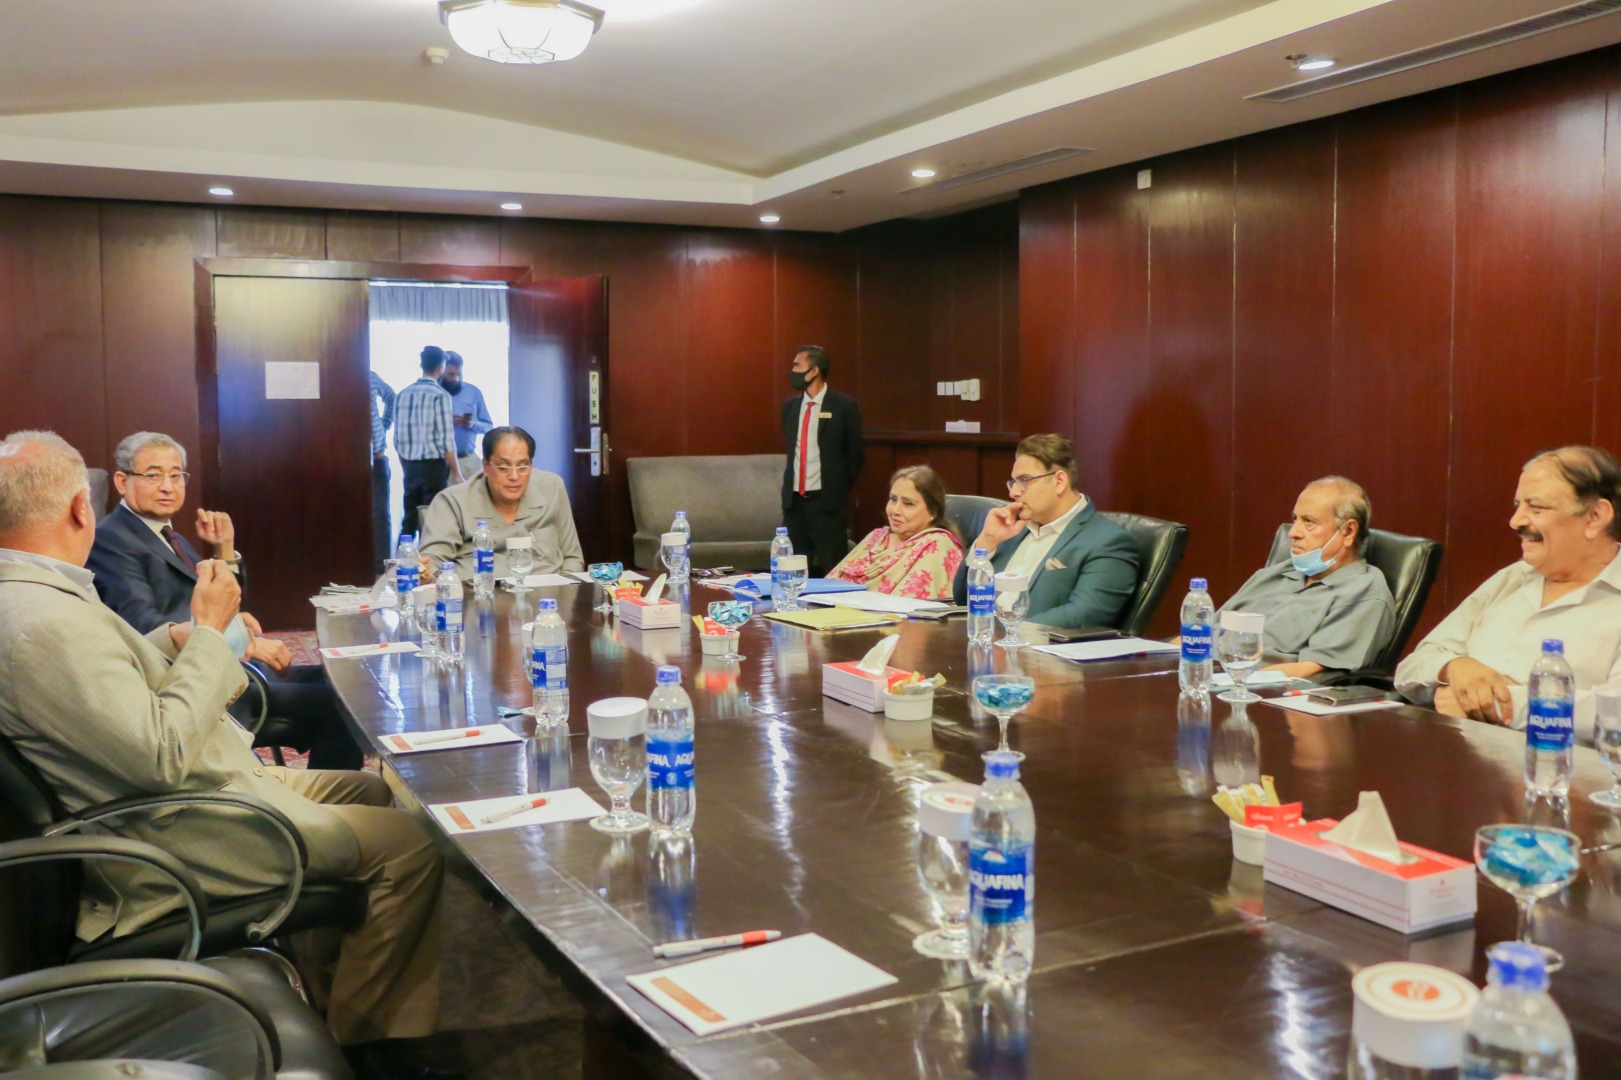 The Executive Committee Meeting of PHA was held on 2nd March, 2022 at Ramada Plaza Hotel Karachi